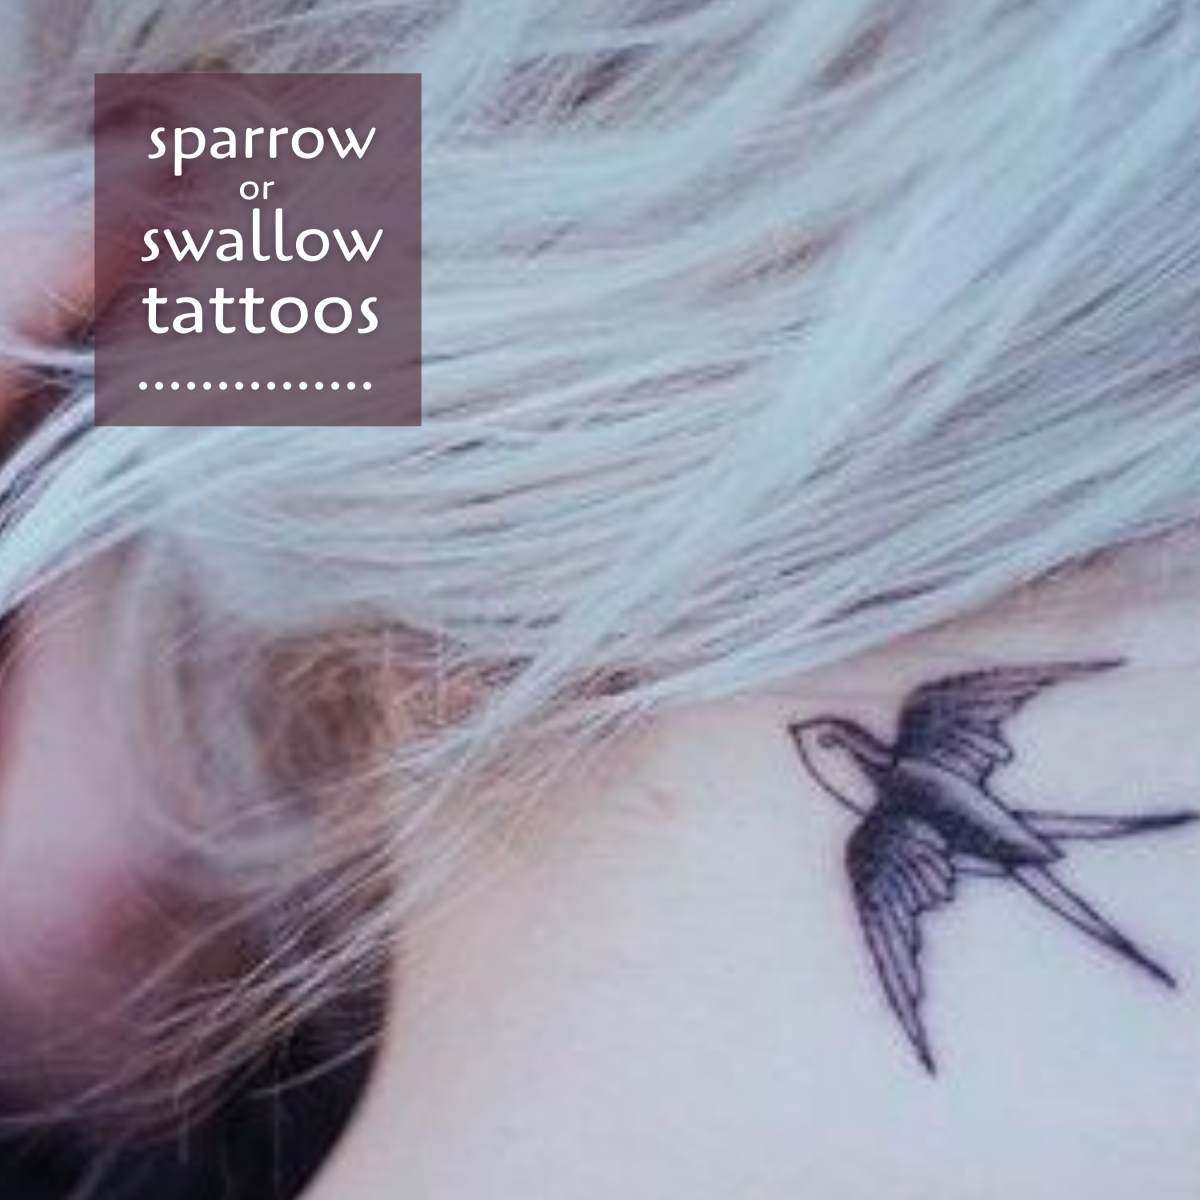 chad harwell recommends Sparrow Vs Swallow Tattoo